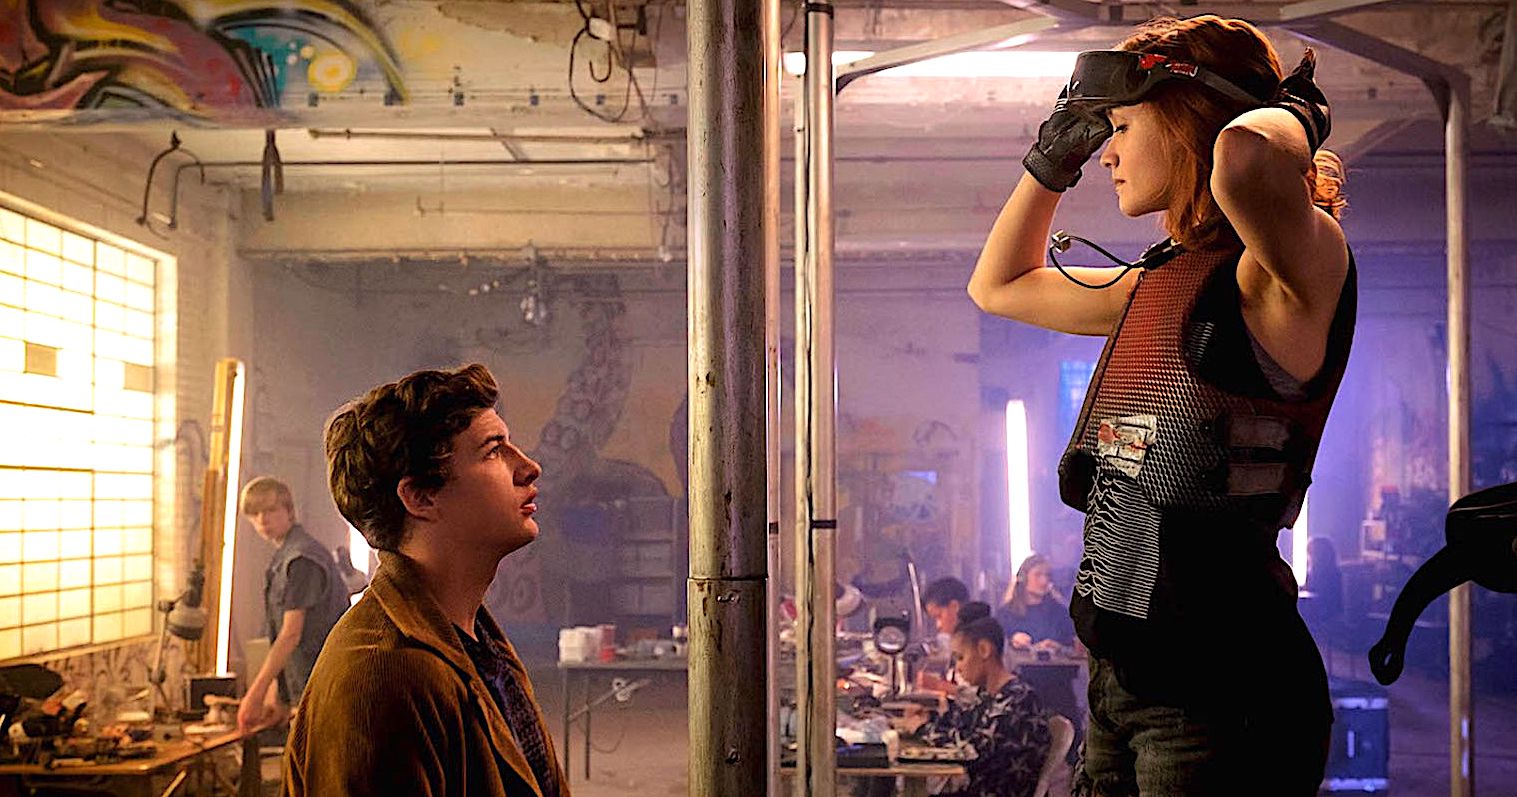 Screenplay Review – Ready Player One